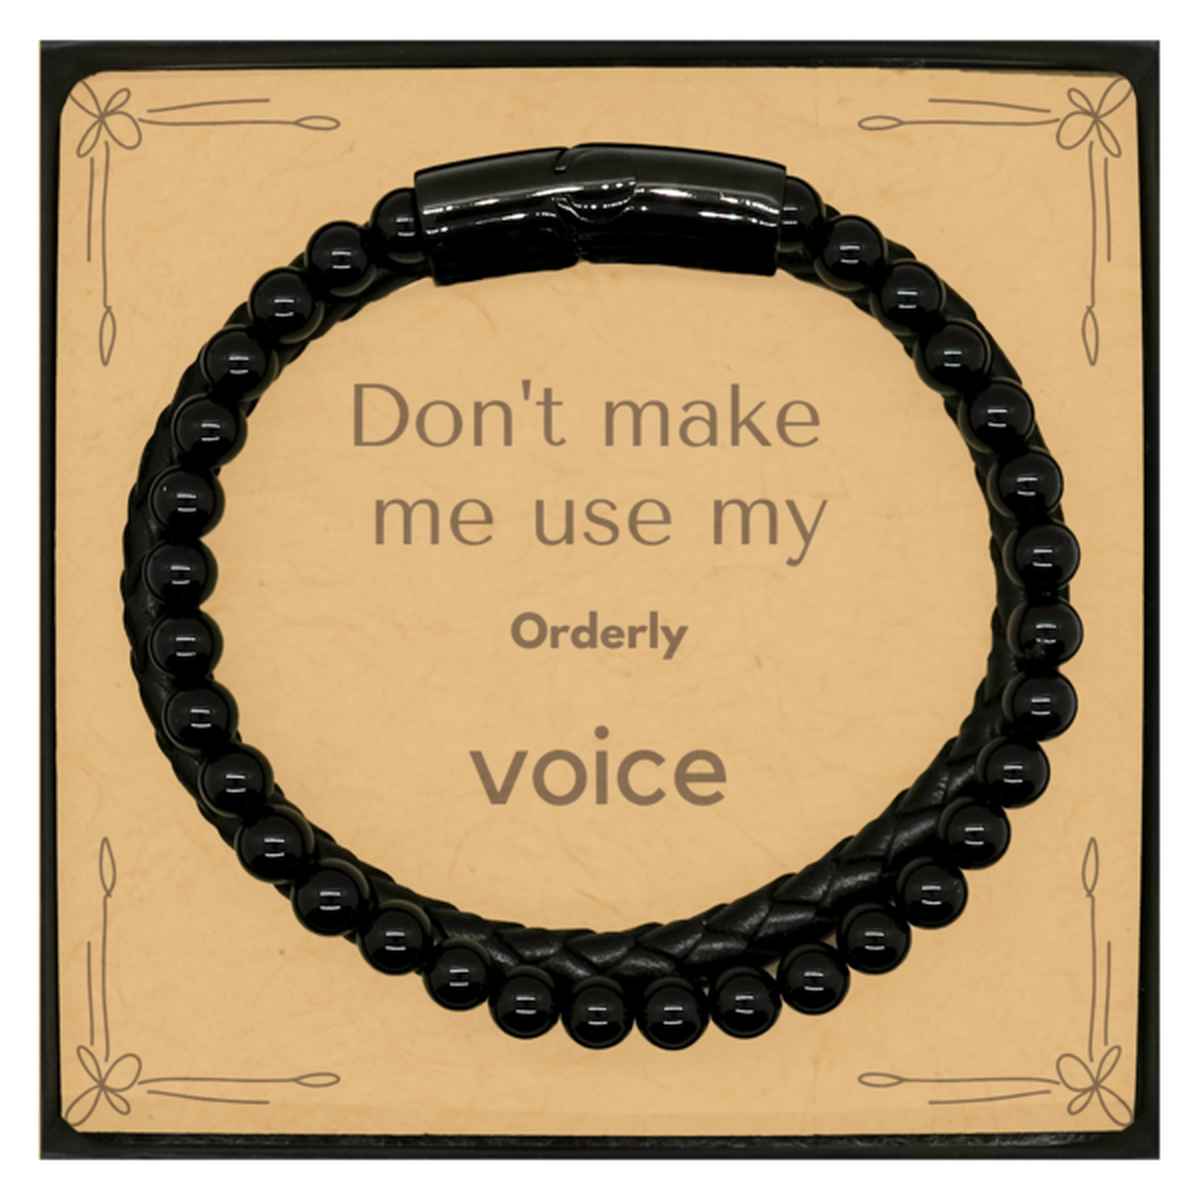 Don't make me use my Orderly voice, Sarcasm Orderly Card Gifts, Christmas Orderly Stone Leather Bracelets Birthday Unique Gifts For Orderly Coworkers, Men, Women, Colleague, Friends